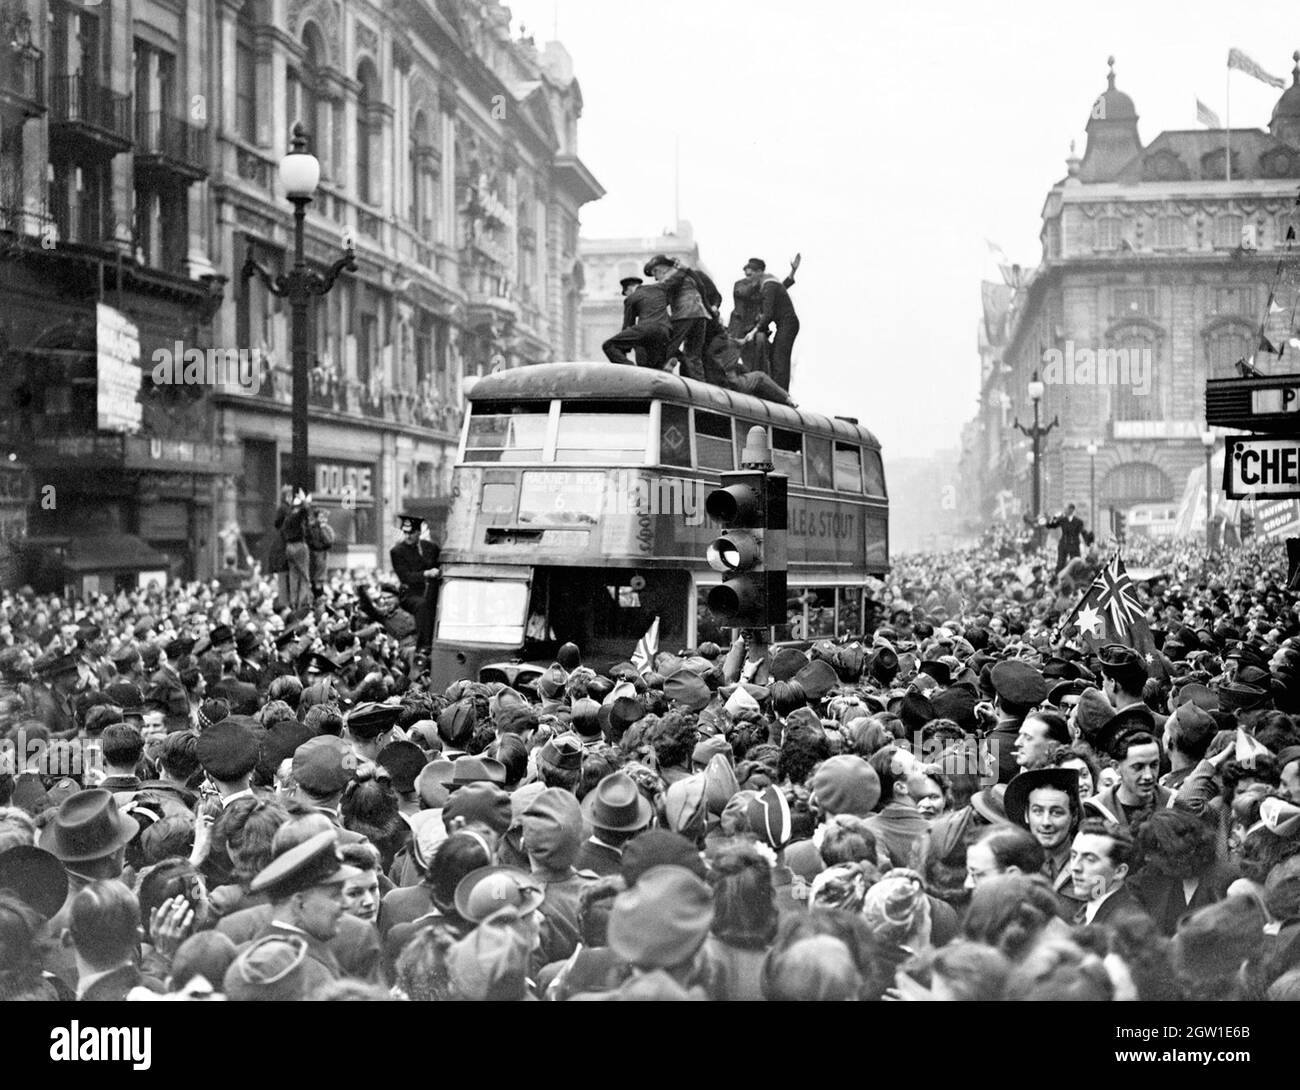 Crowds fill the streets of London on VE Day (Victory in Europe Day), the 8th May 1945 Stock Photo